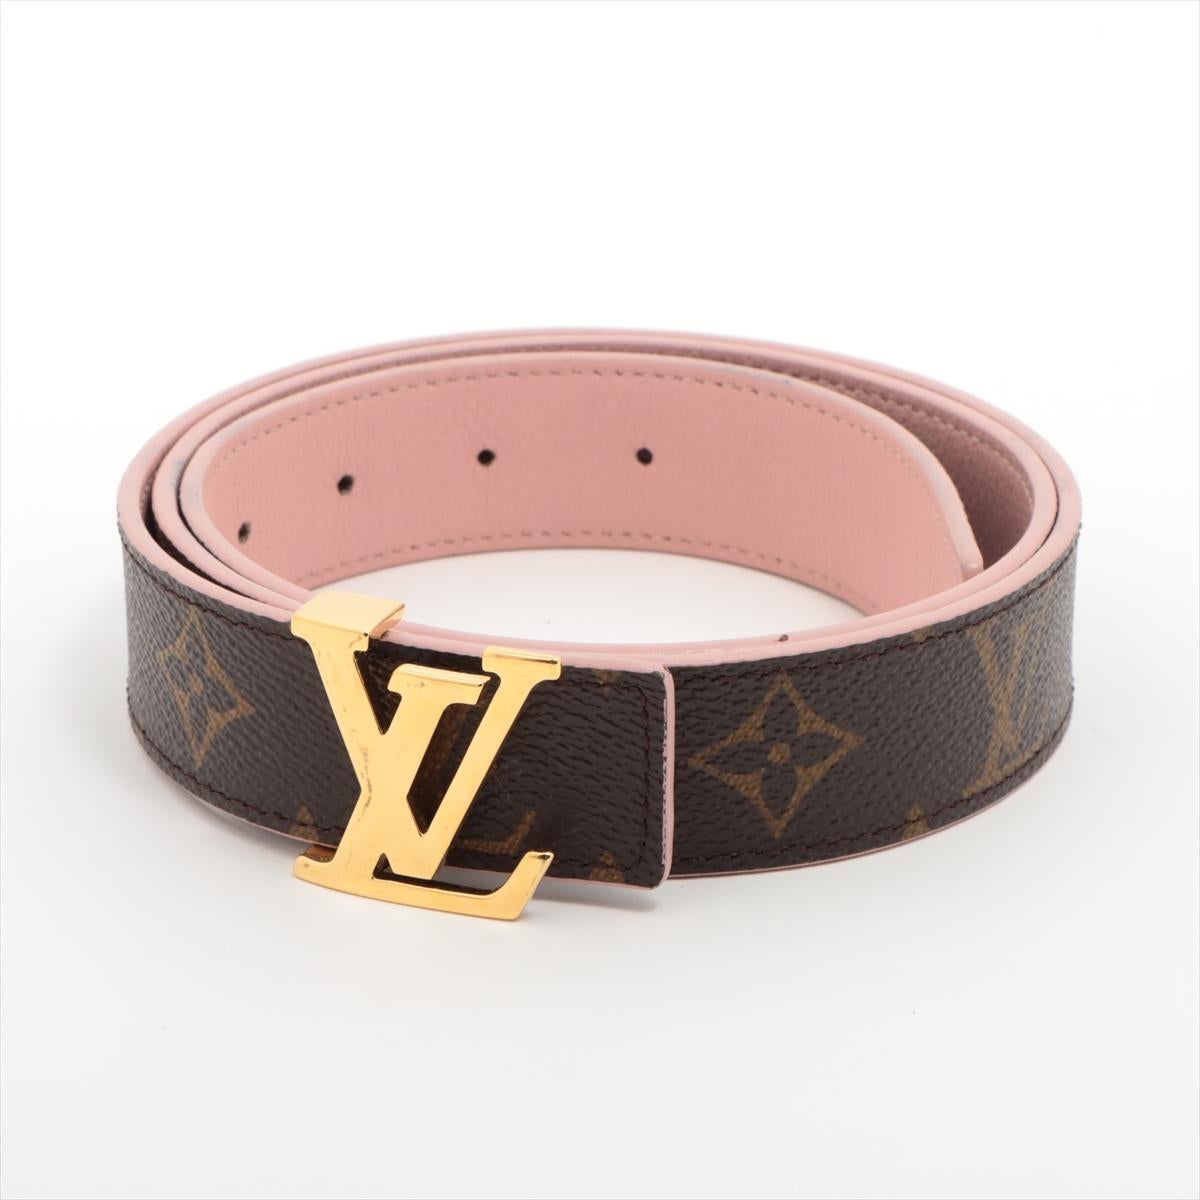 The Louis Vuitton LV Initiales Monogram Reversible Belt in Rose Ballerine is a sophisticated and versatile accessory that effortlessly elevates any ensemble. Crafted from the brand's iconic Monogram canvas, the belt features a timeless LV Initiales